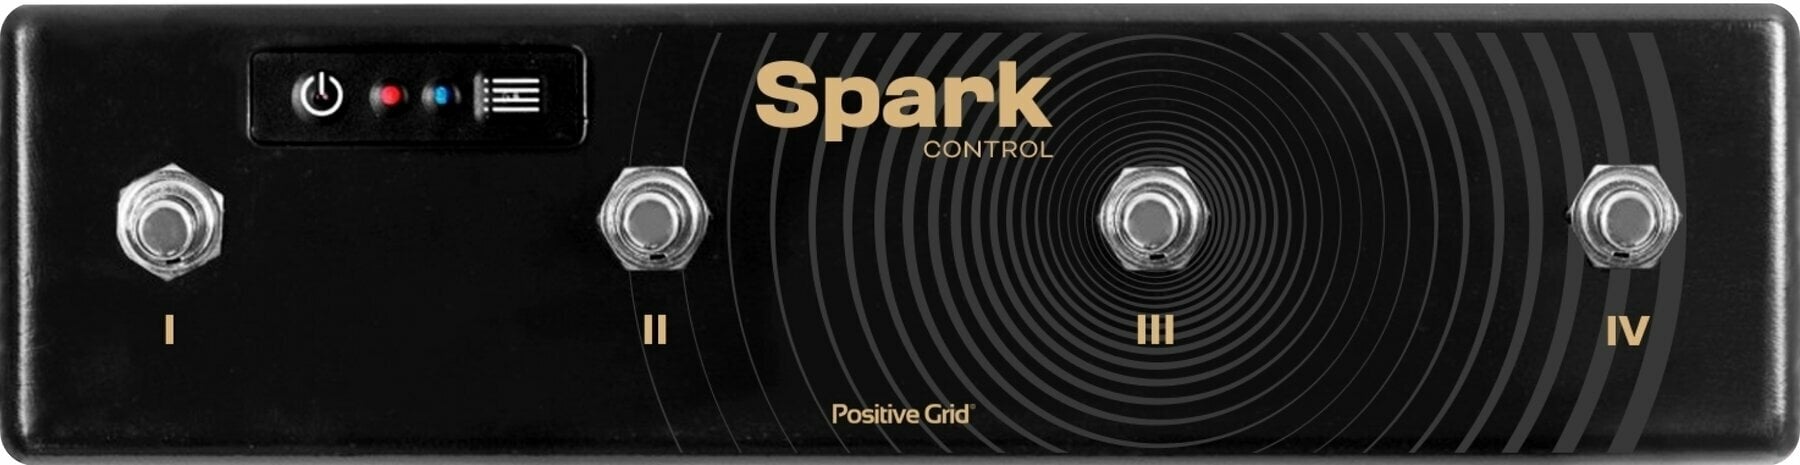 Pedale Footswitch Positive Grid Spark Control Pedale Footswitch